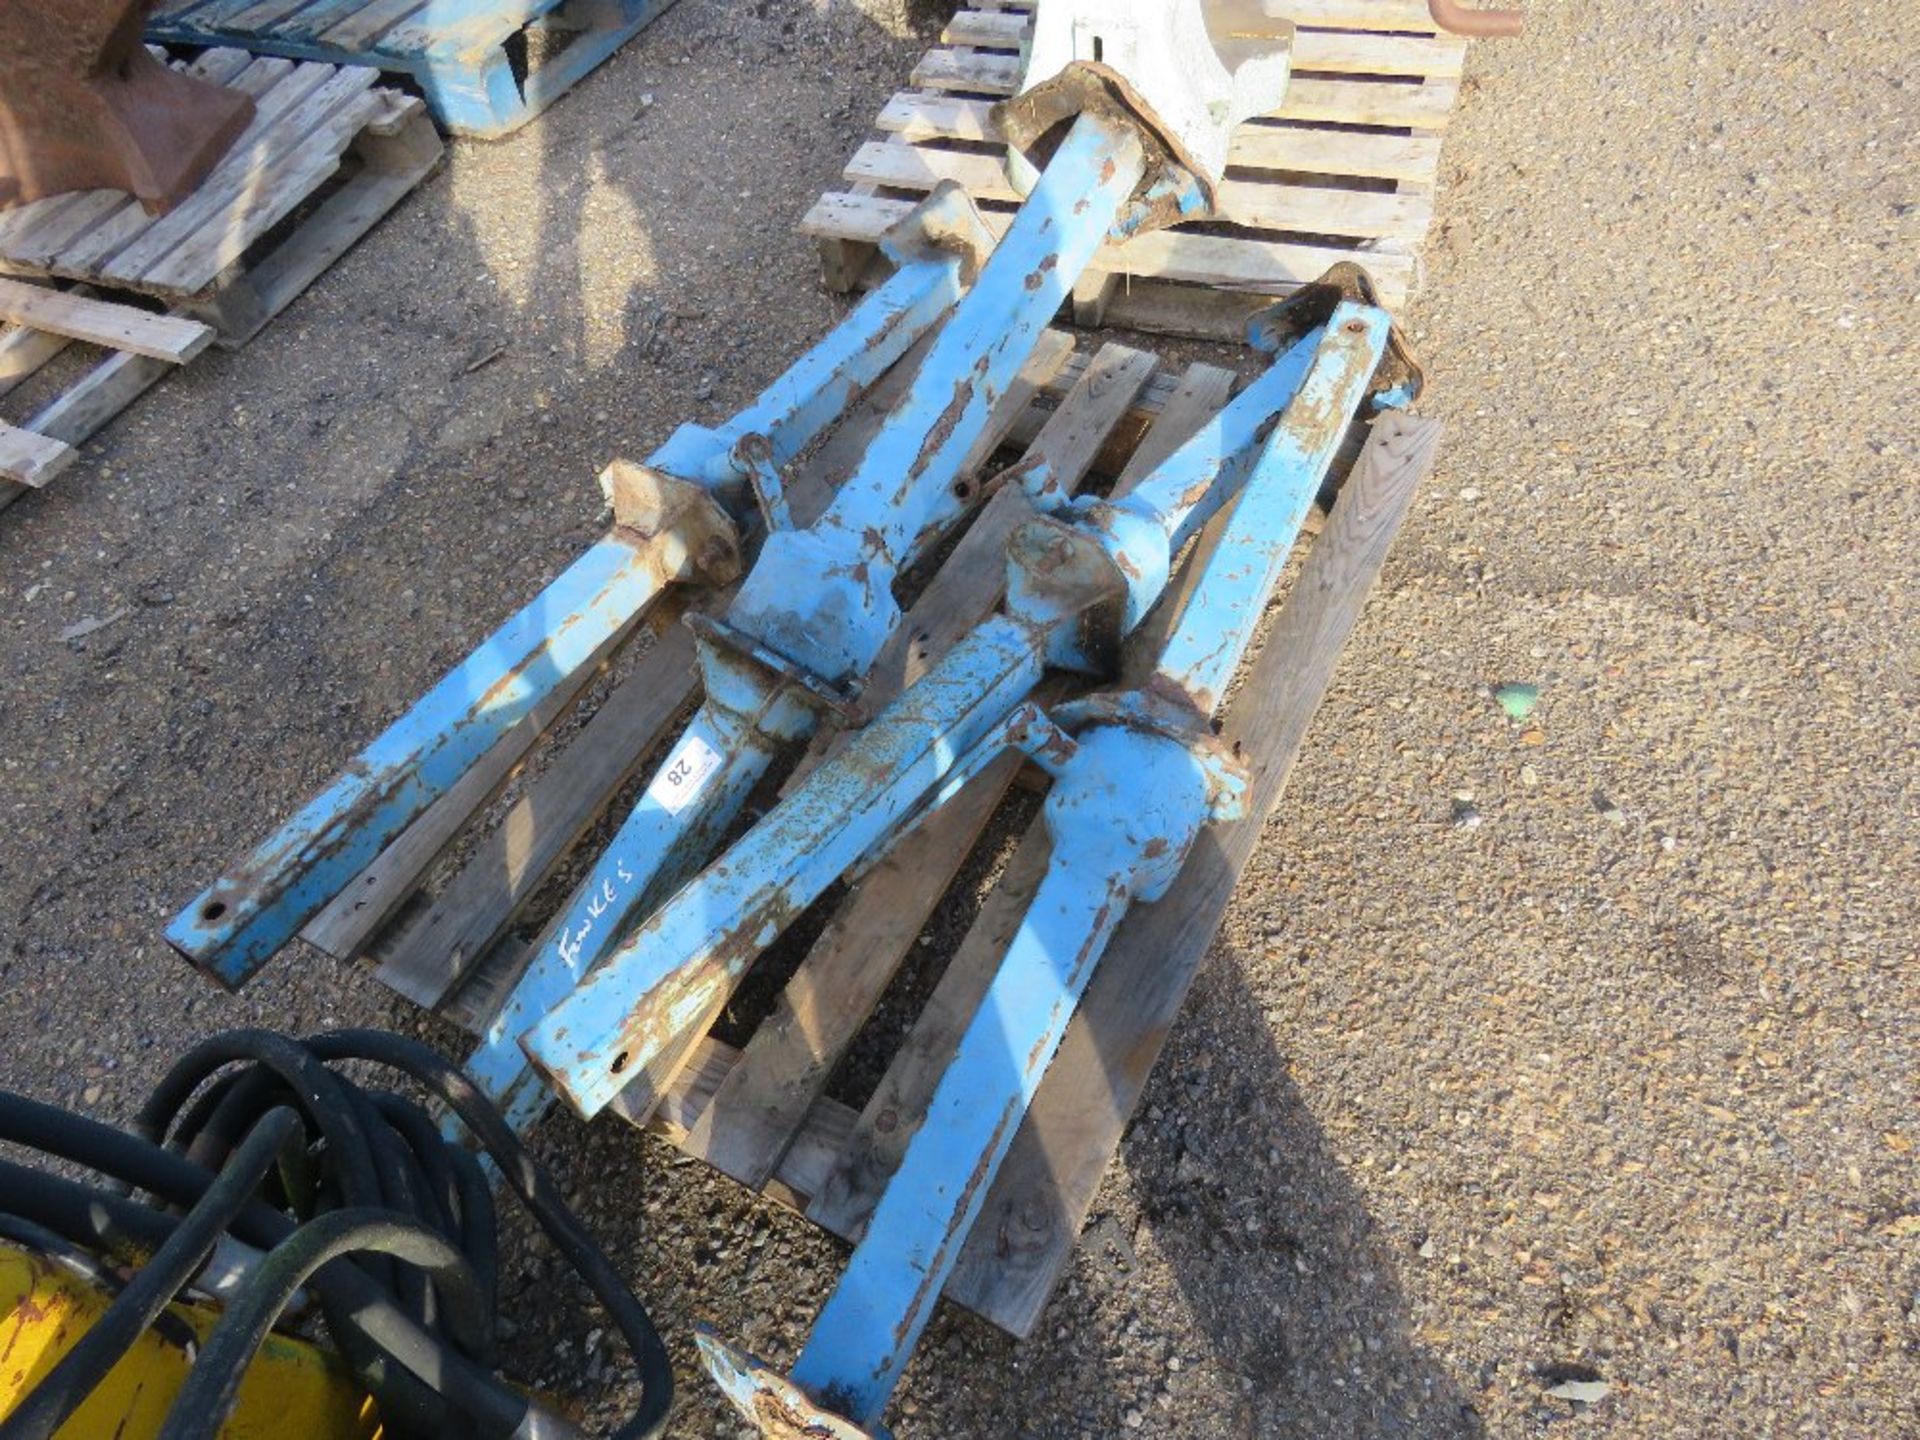 4 X ADJUSTABLE SUPPORT LEGS, 4FT CLOSED LENGTH APPROX. THIS LOT IS SOLD UNDER THE AUCTIONEERS MA - Image 2 of 5